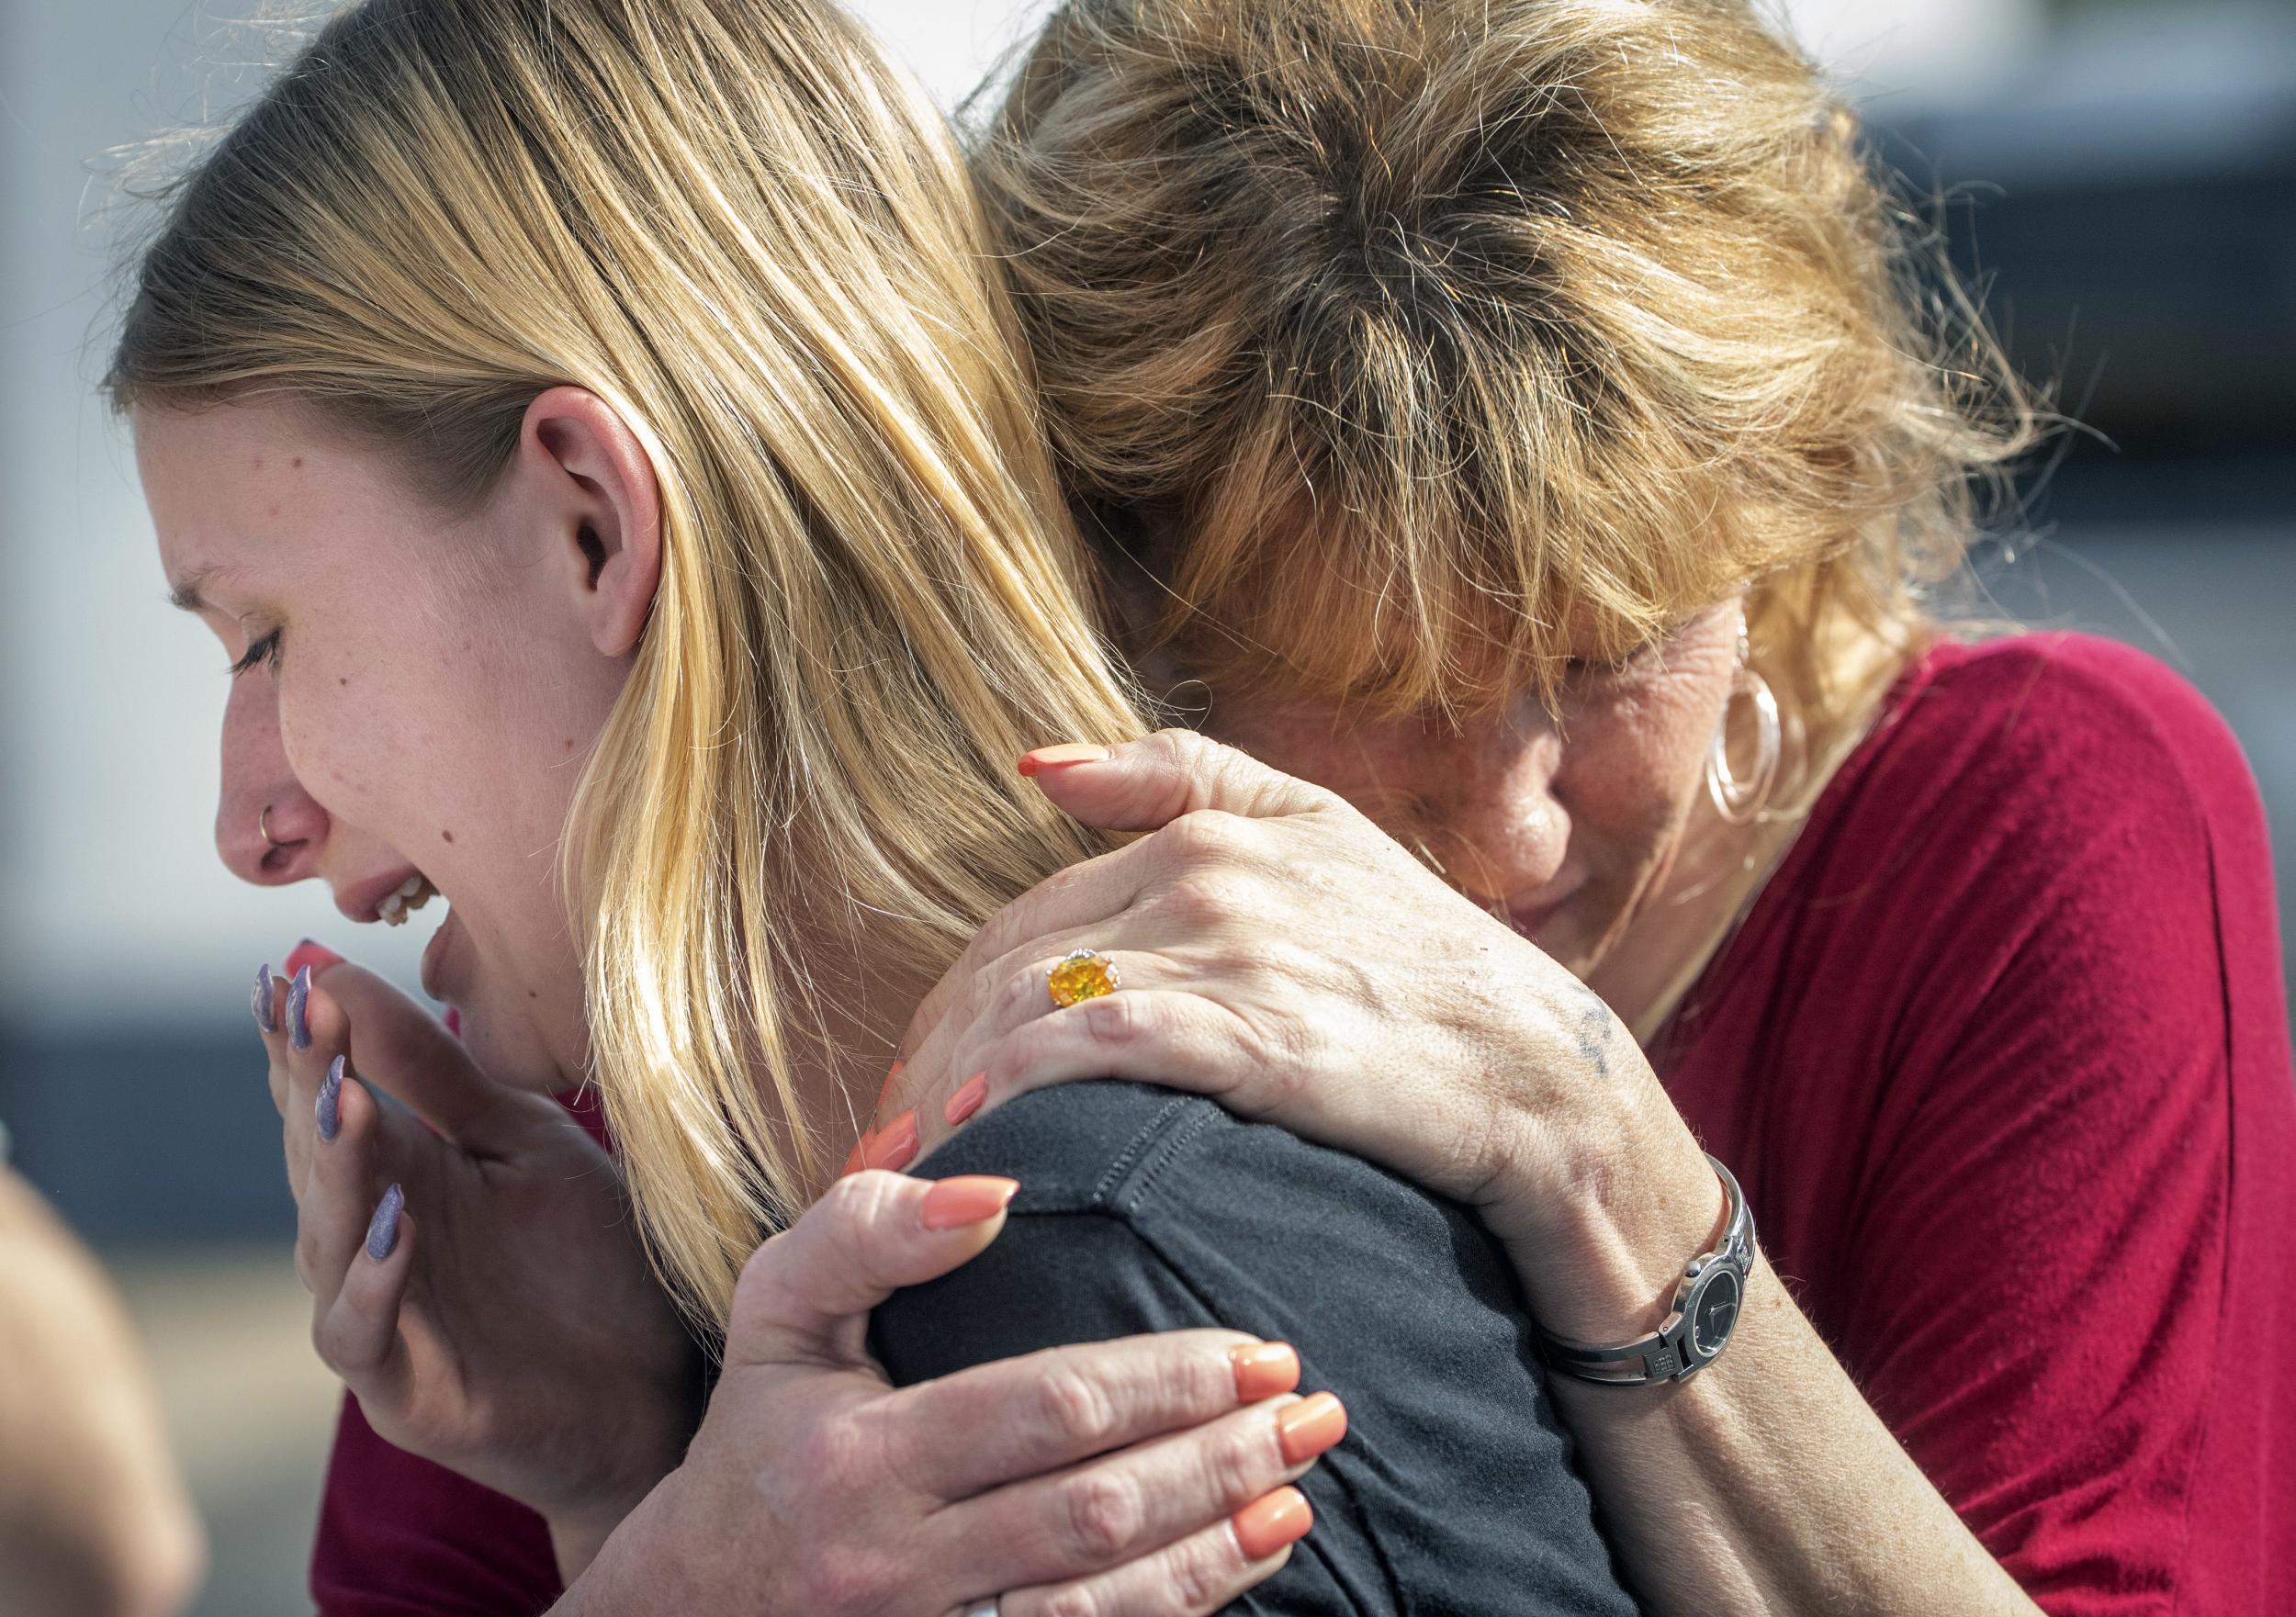 Texas shooting: Multiple people confirmed dead and possible explosives found on campus